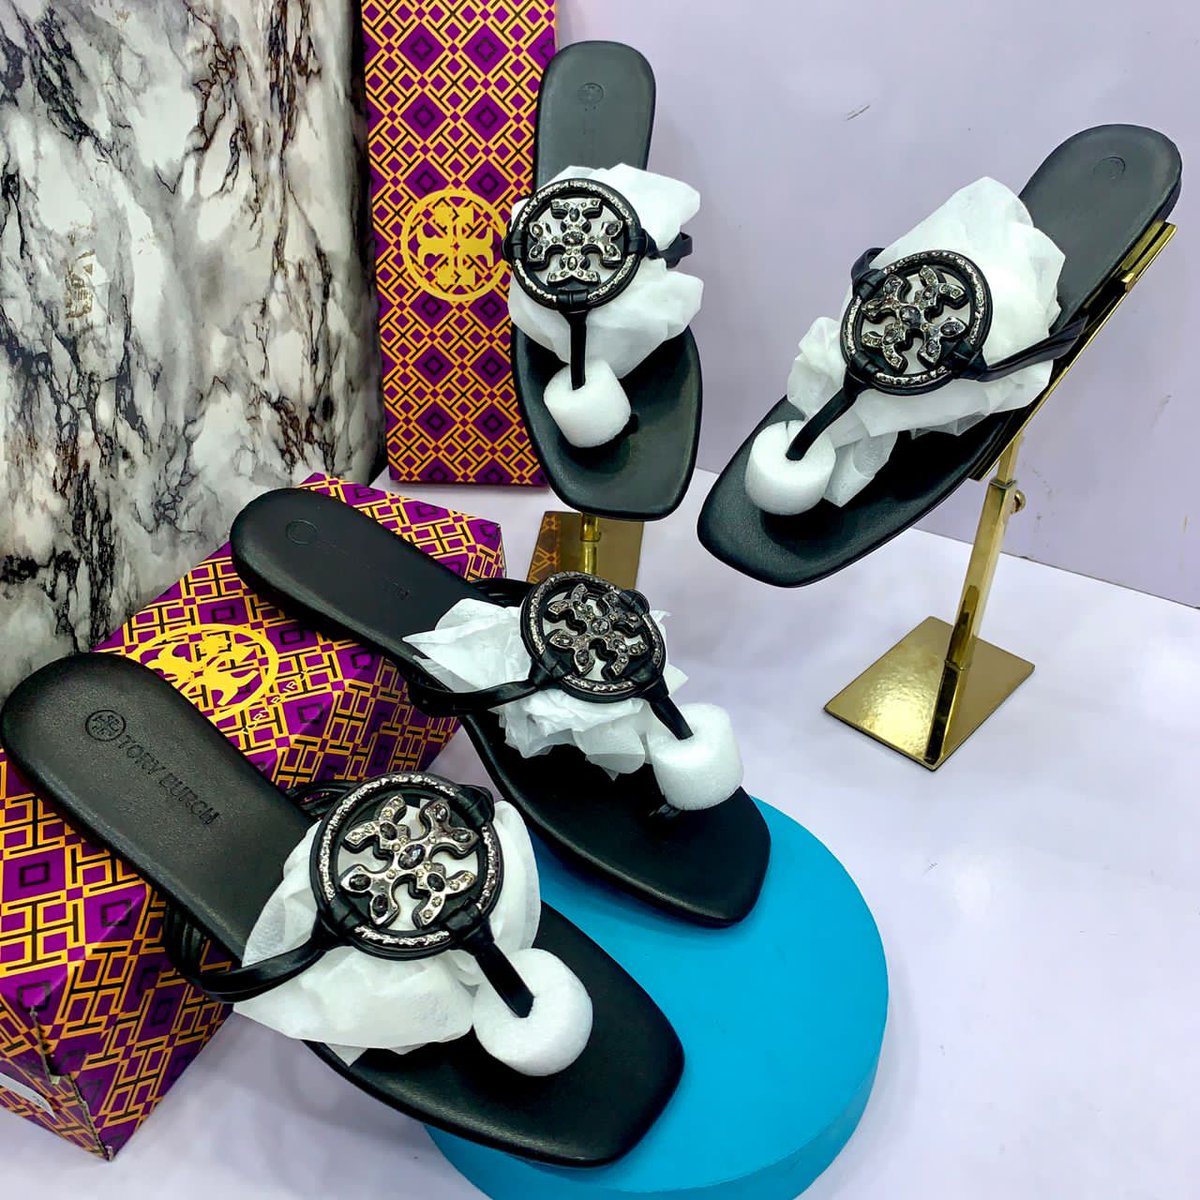 Price 25k
#styleblogger #stylefashion #WomeninBusiness #shoeslover #giftsforher #Accessories #shoes #shoesaddict #shoesinlagos #shoesstyle #shoeslover